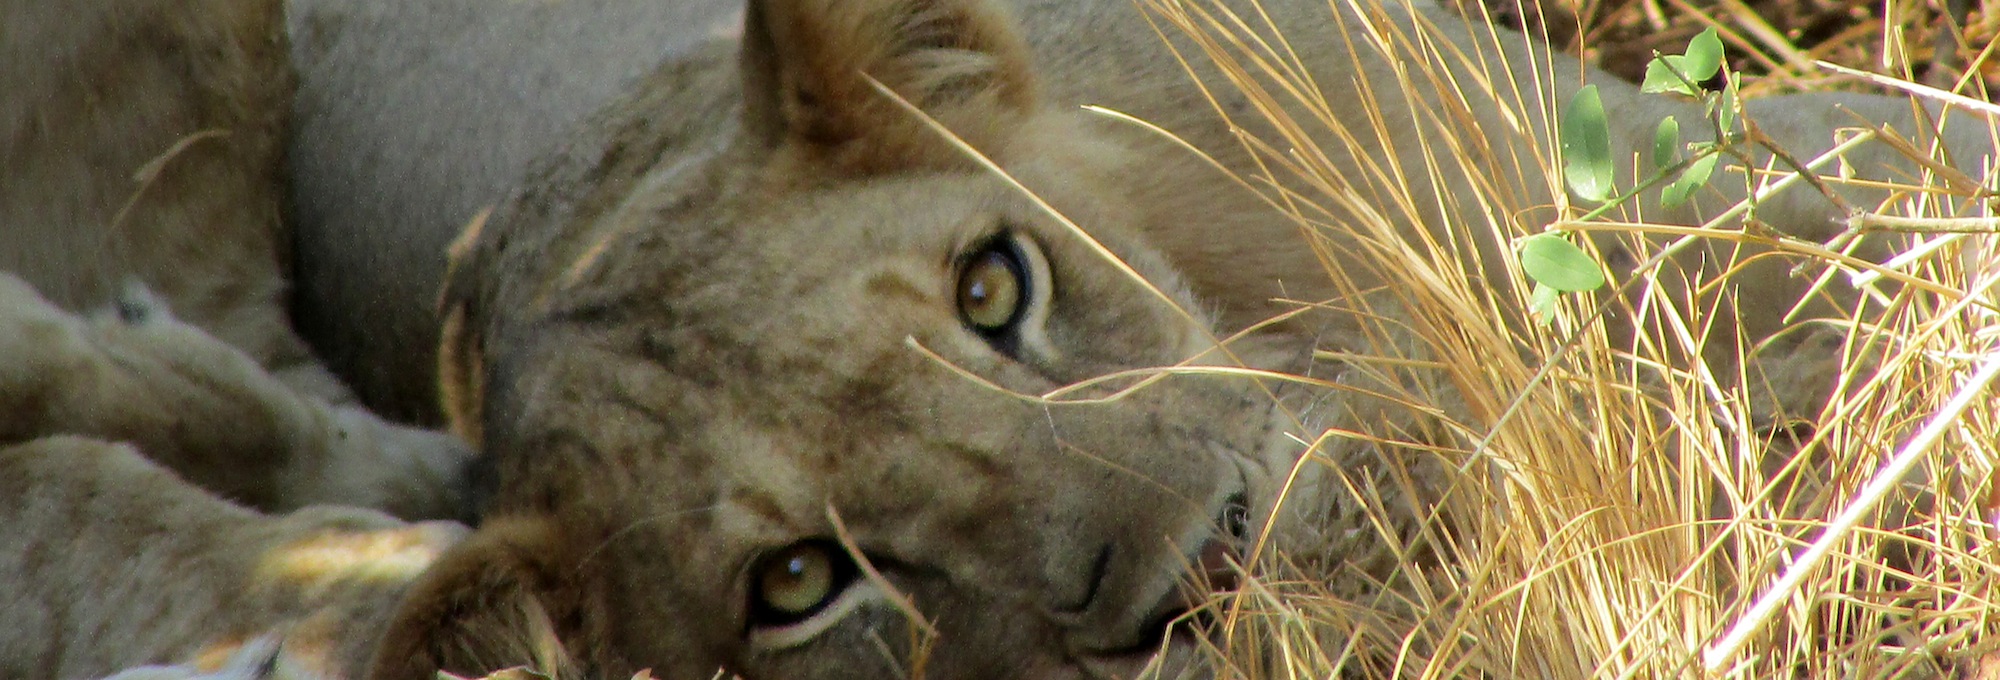 The moment when a lioness in the African savannah sticks his penetrating gaze on yours...